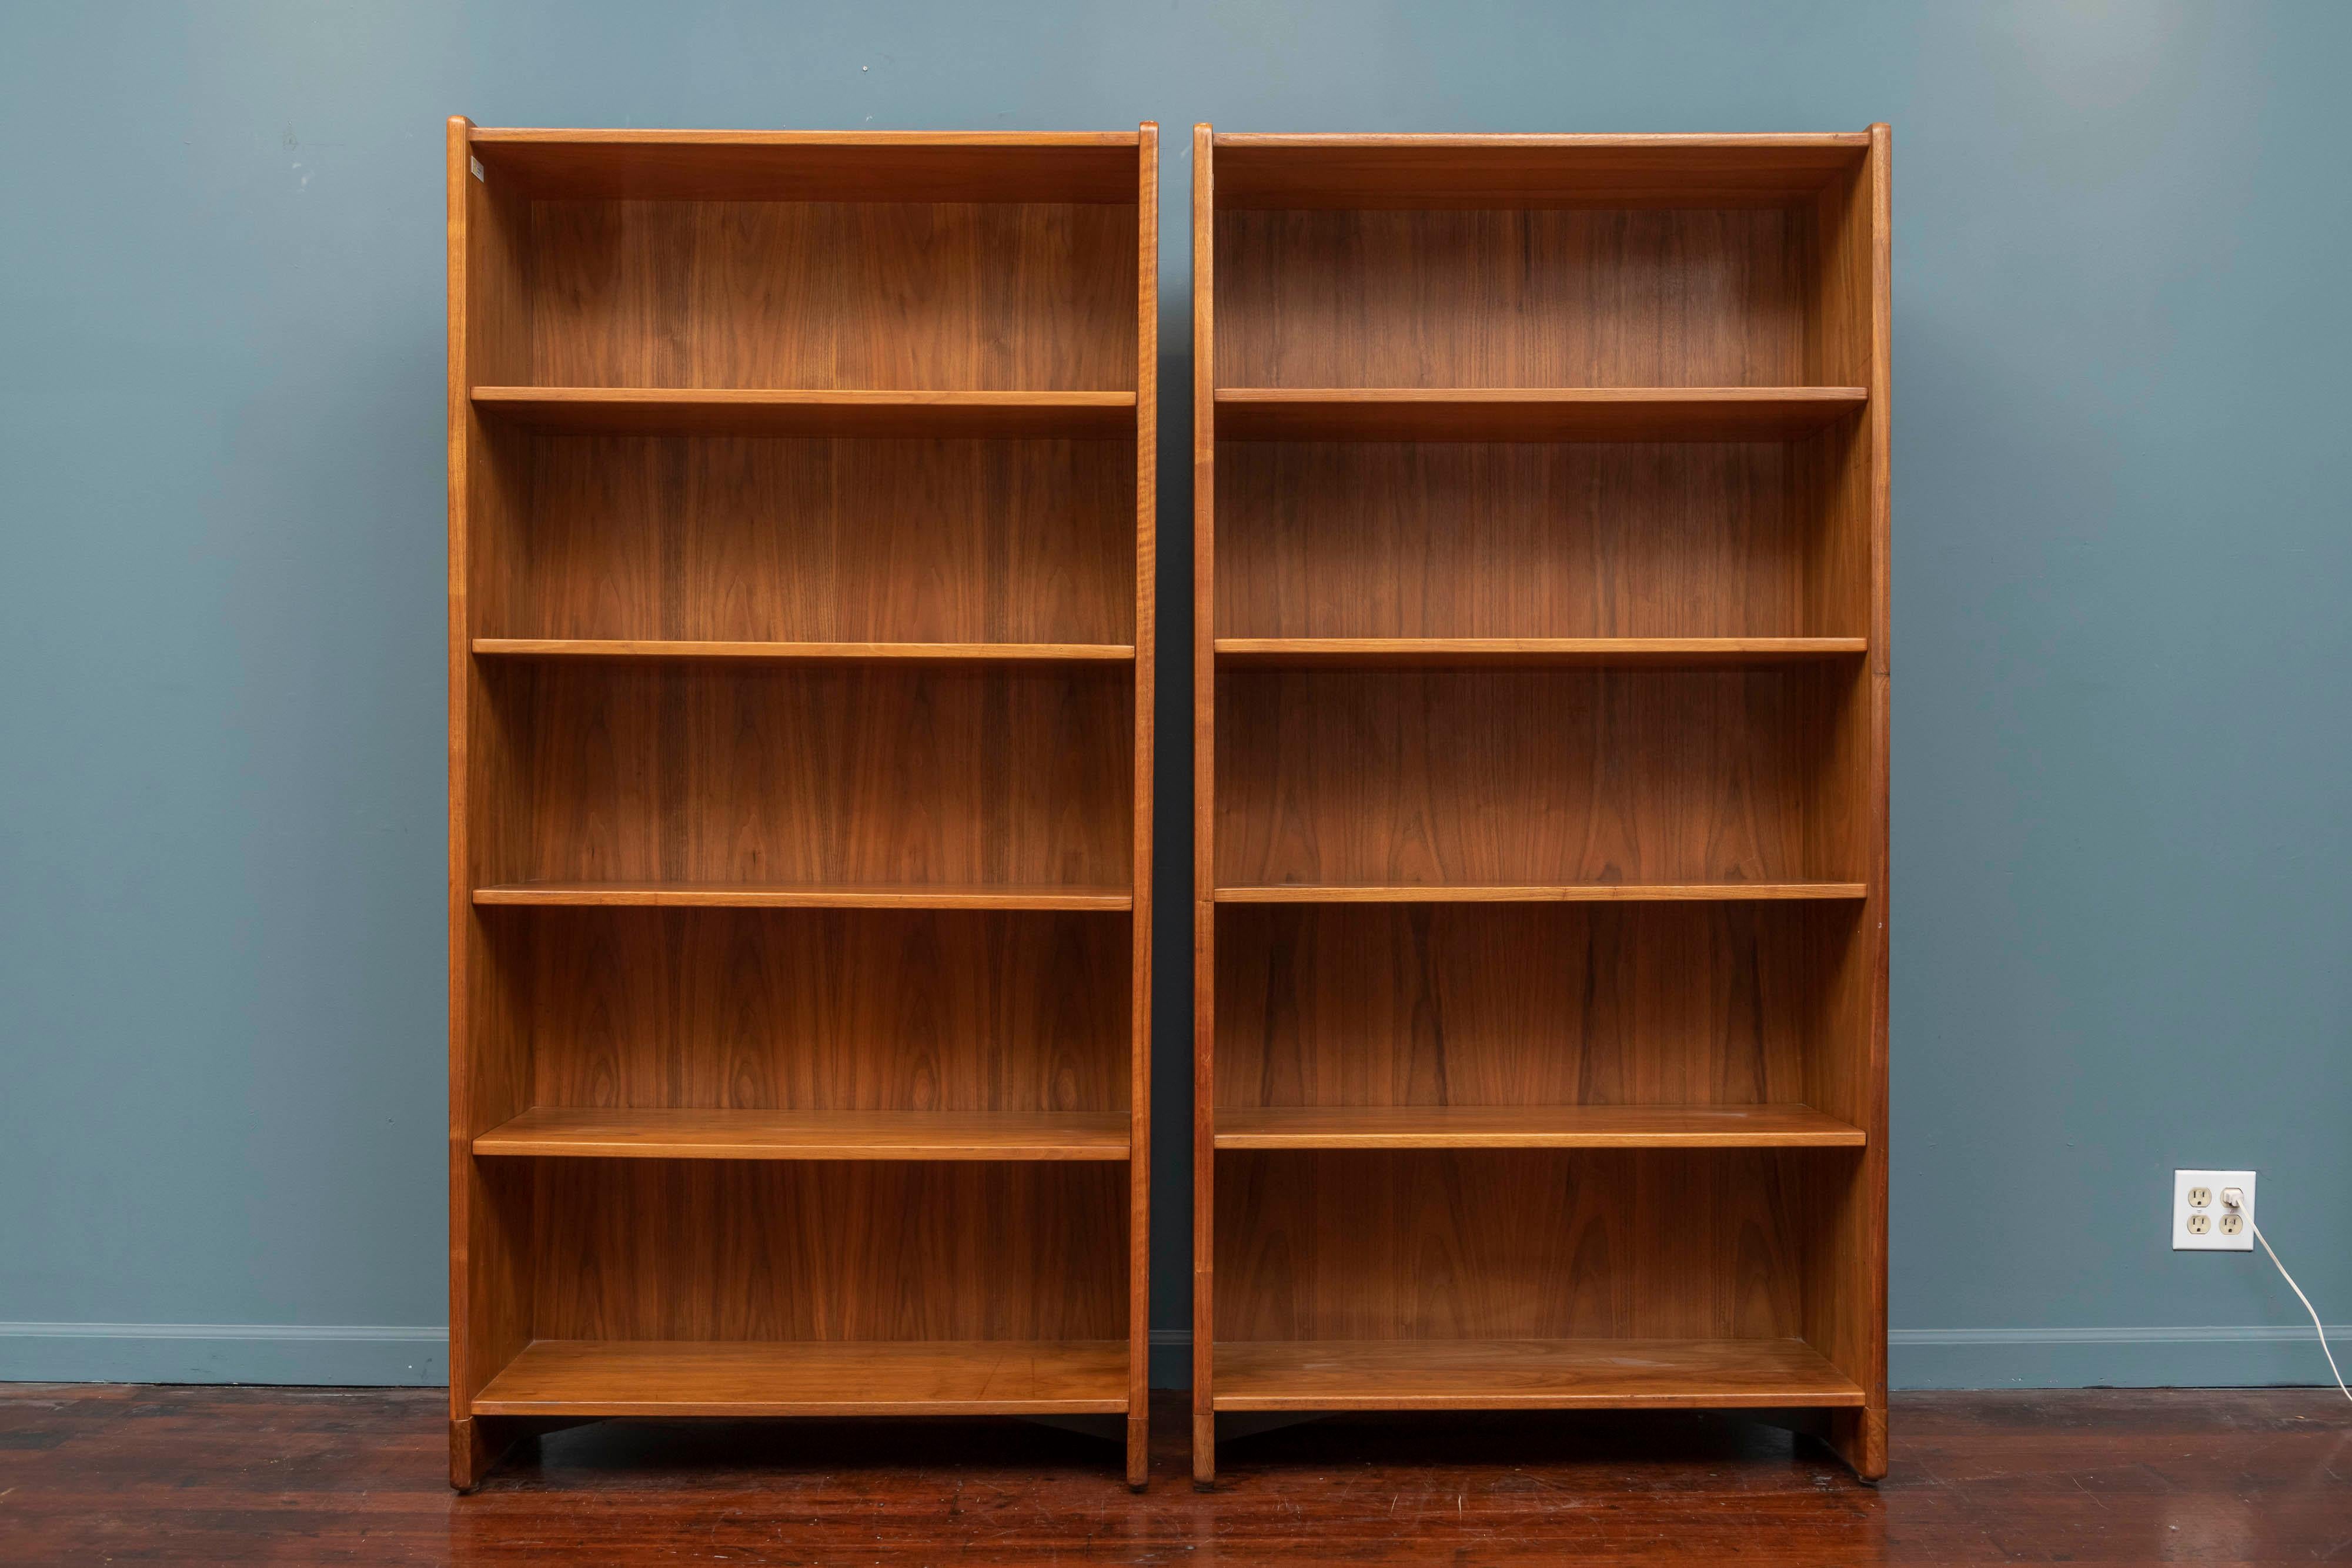 Jens Risom design pair of walnut bookcases with 5 adjustable shelves, solid high quality construction with finished backs.